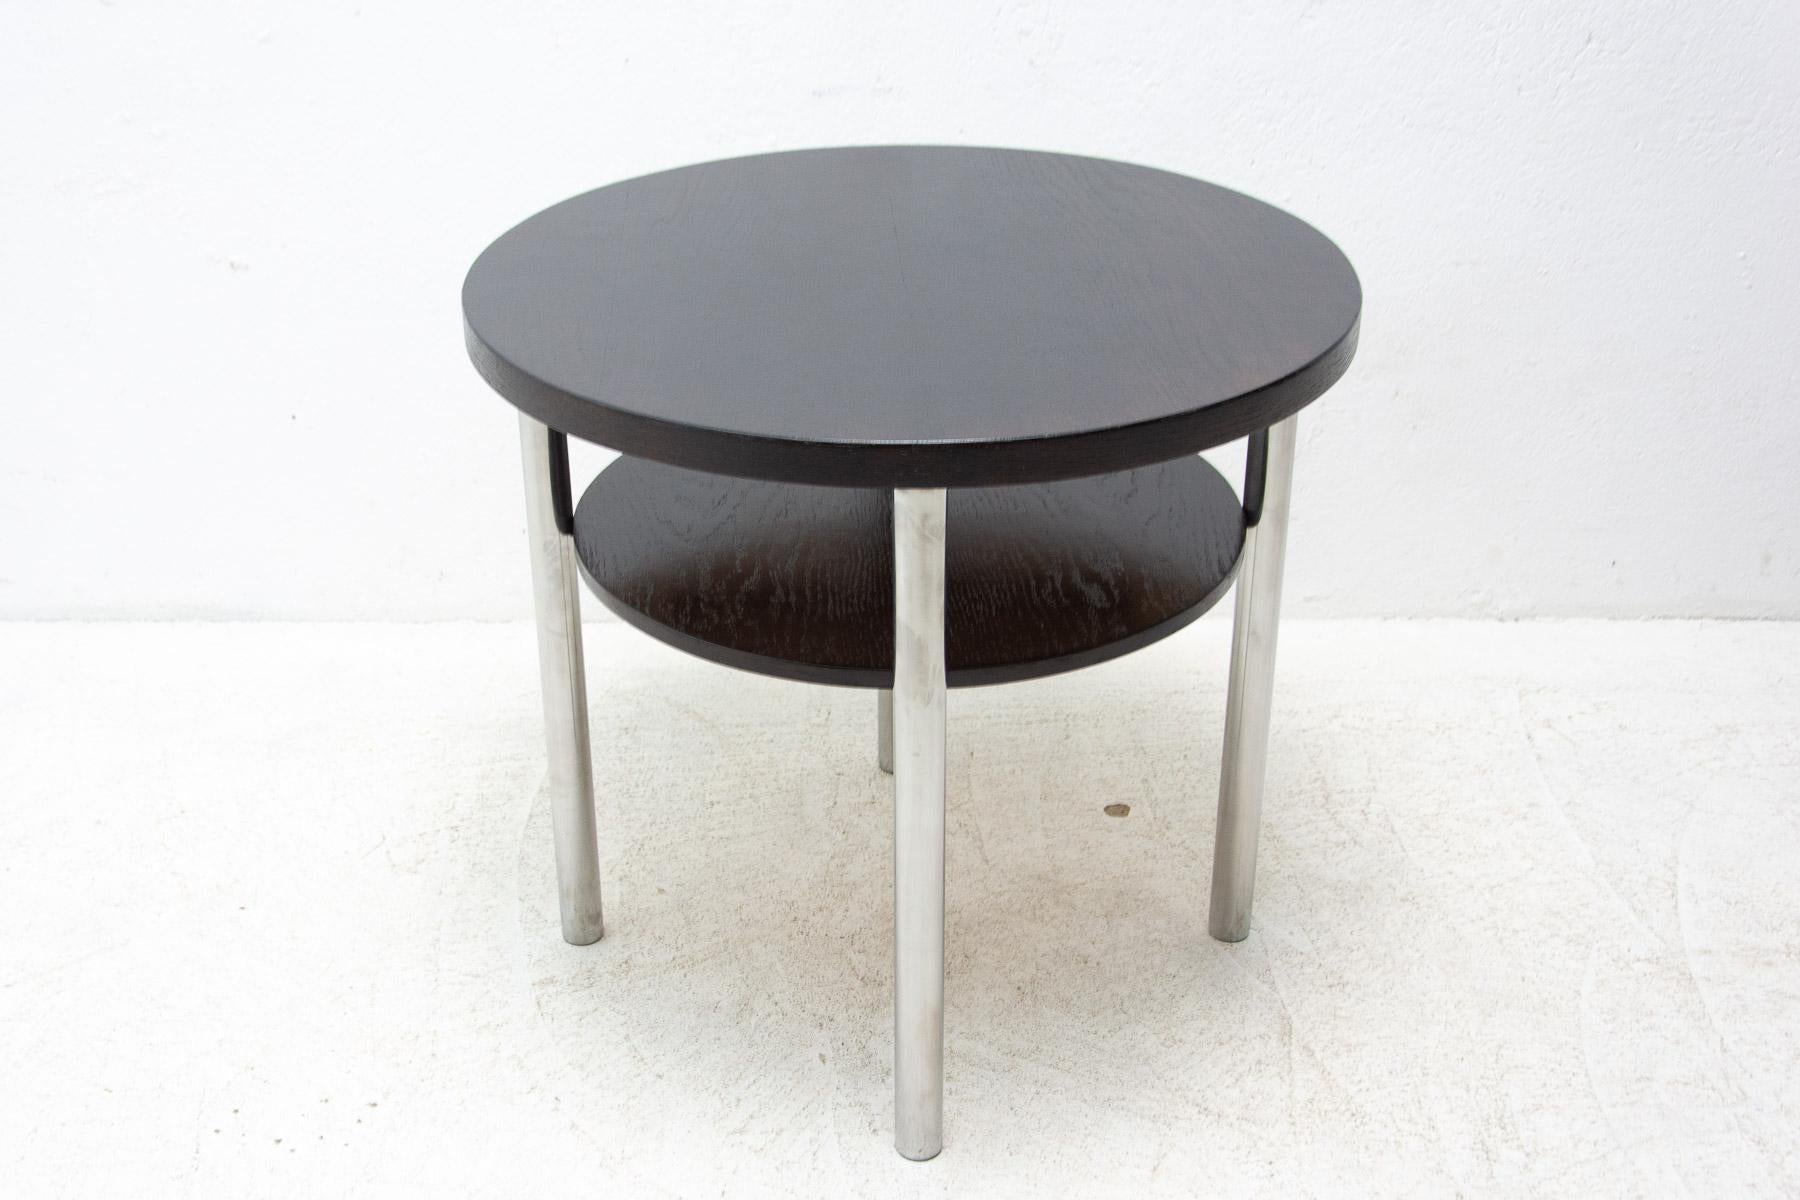 Plated Bauhaus Chromed Coffee Table by Robert Slezak, 1930s For Sale